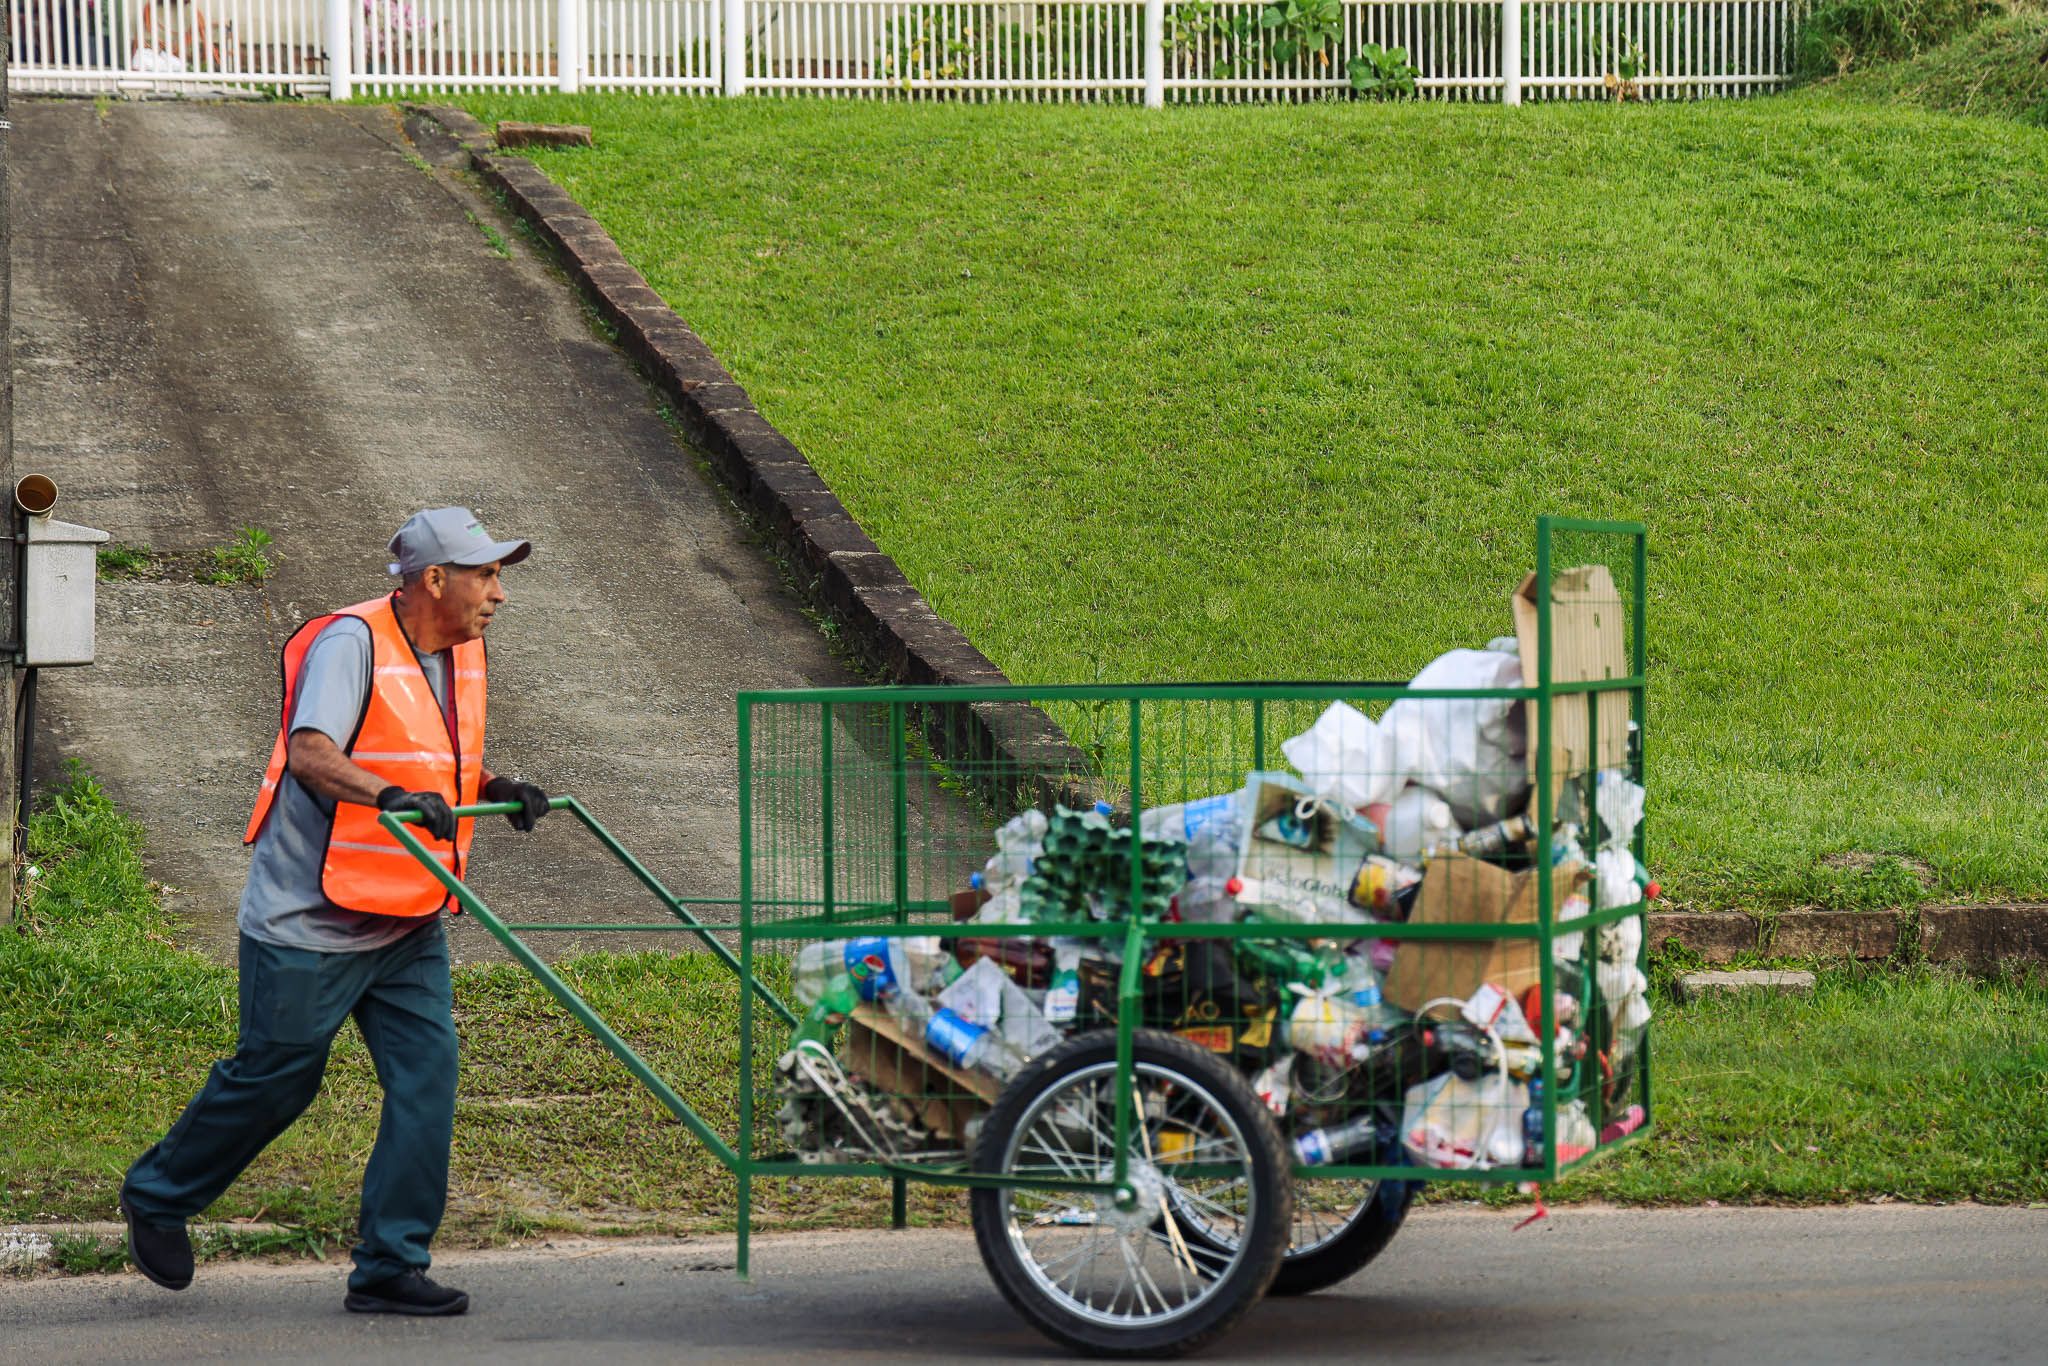 Eloi, 63, a graduate of Projecto Reciclar, pushes a green cart filled with collected recycles.